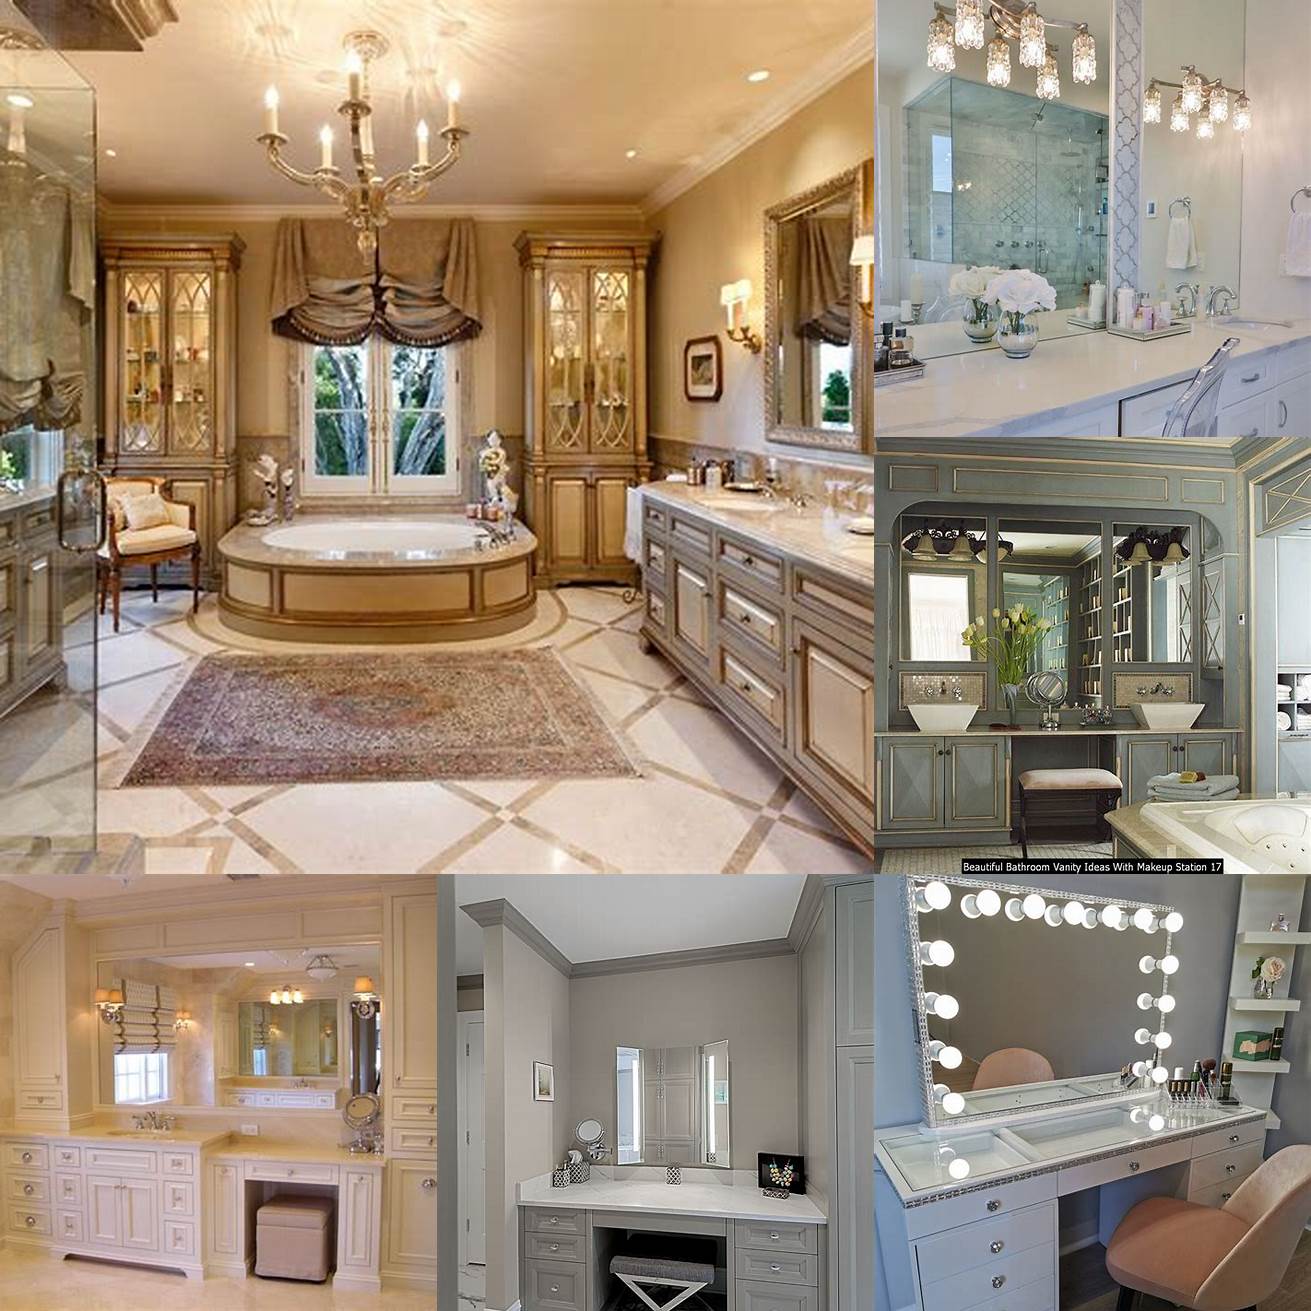 A luxurious bathroom vanity with makeup station and a crystal chandelier